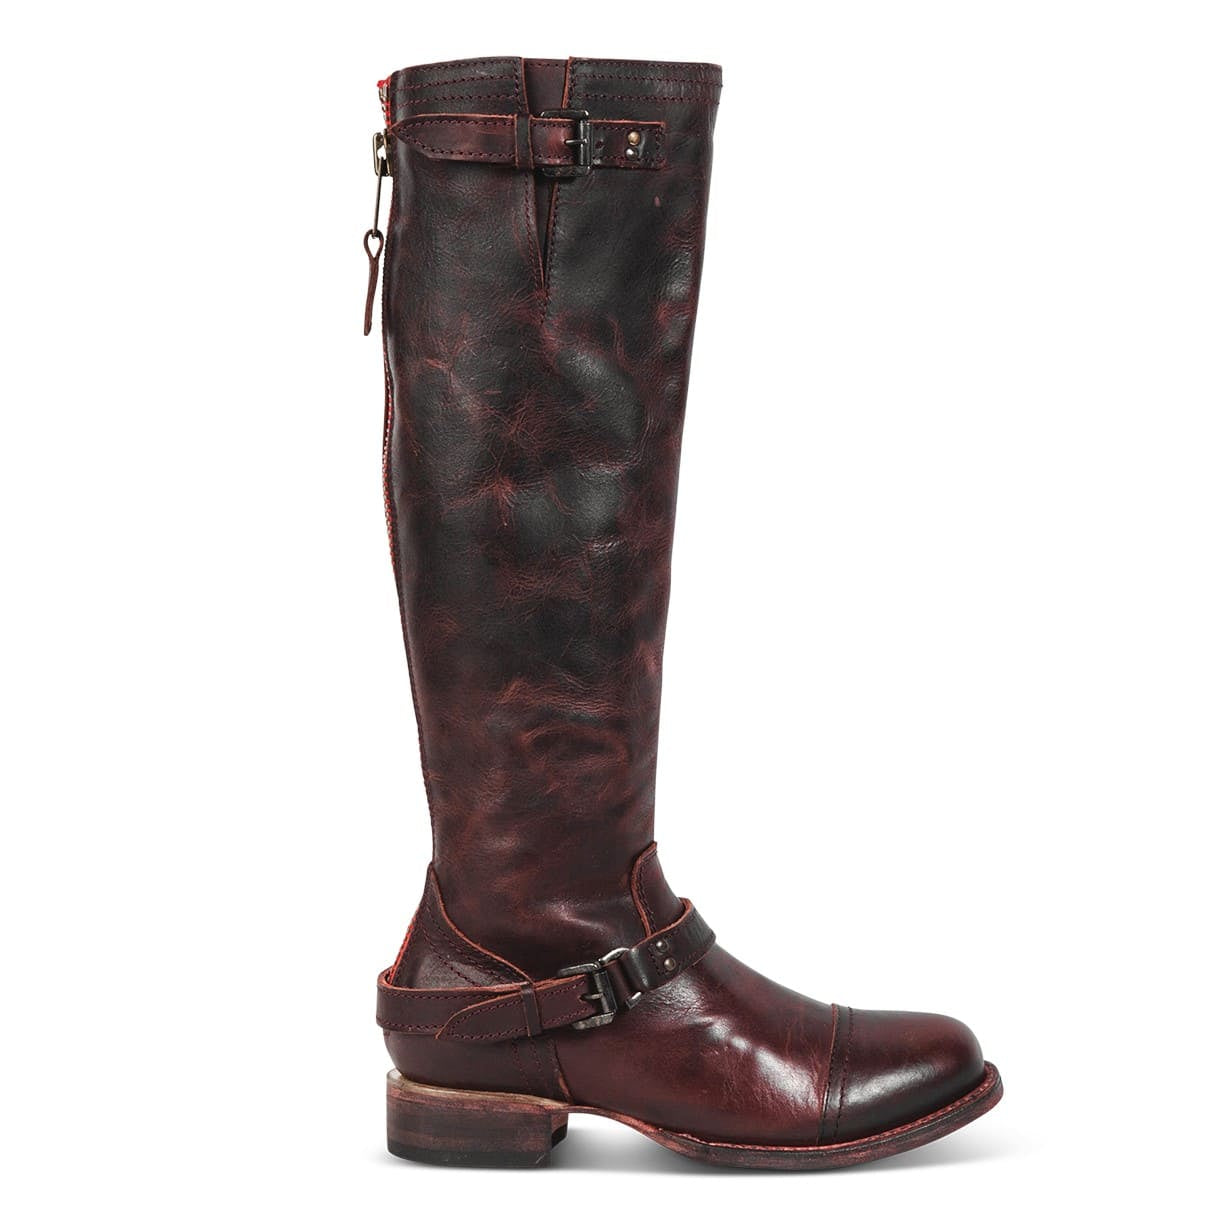 FREEBIRD women's Roadey wine tall construction boot with double buckle detailing and signature red tracked zipper